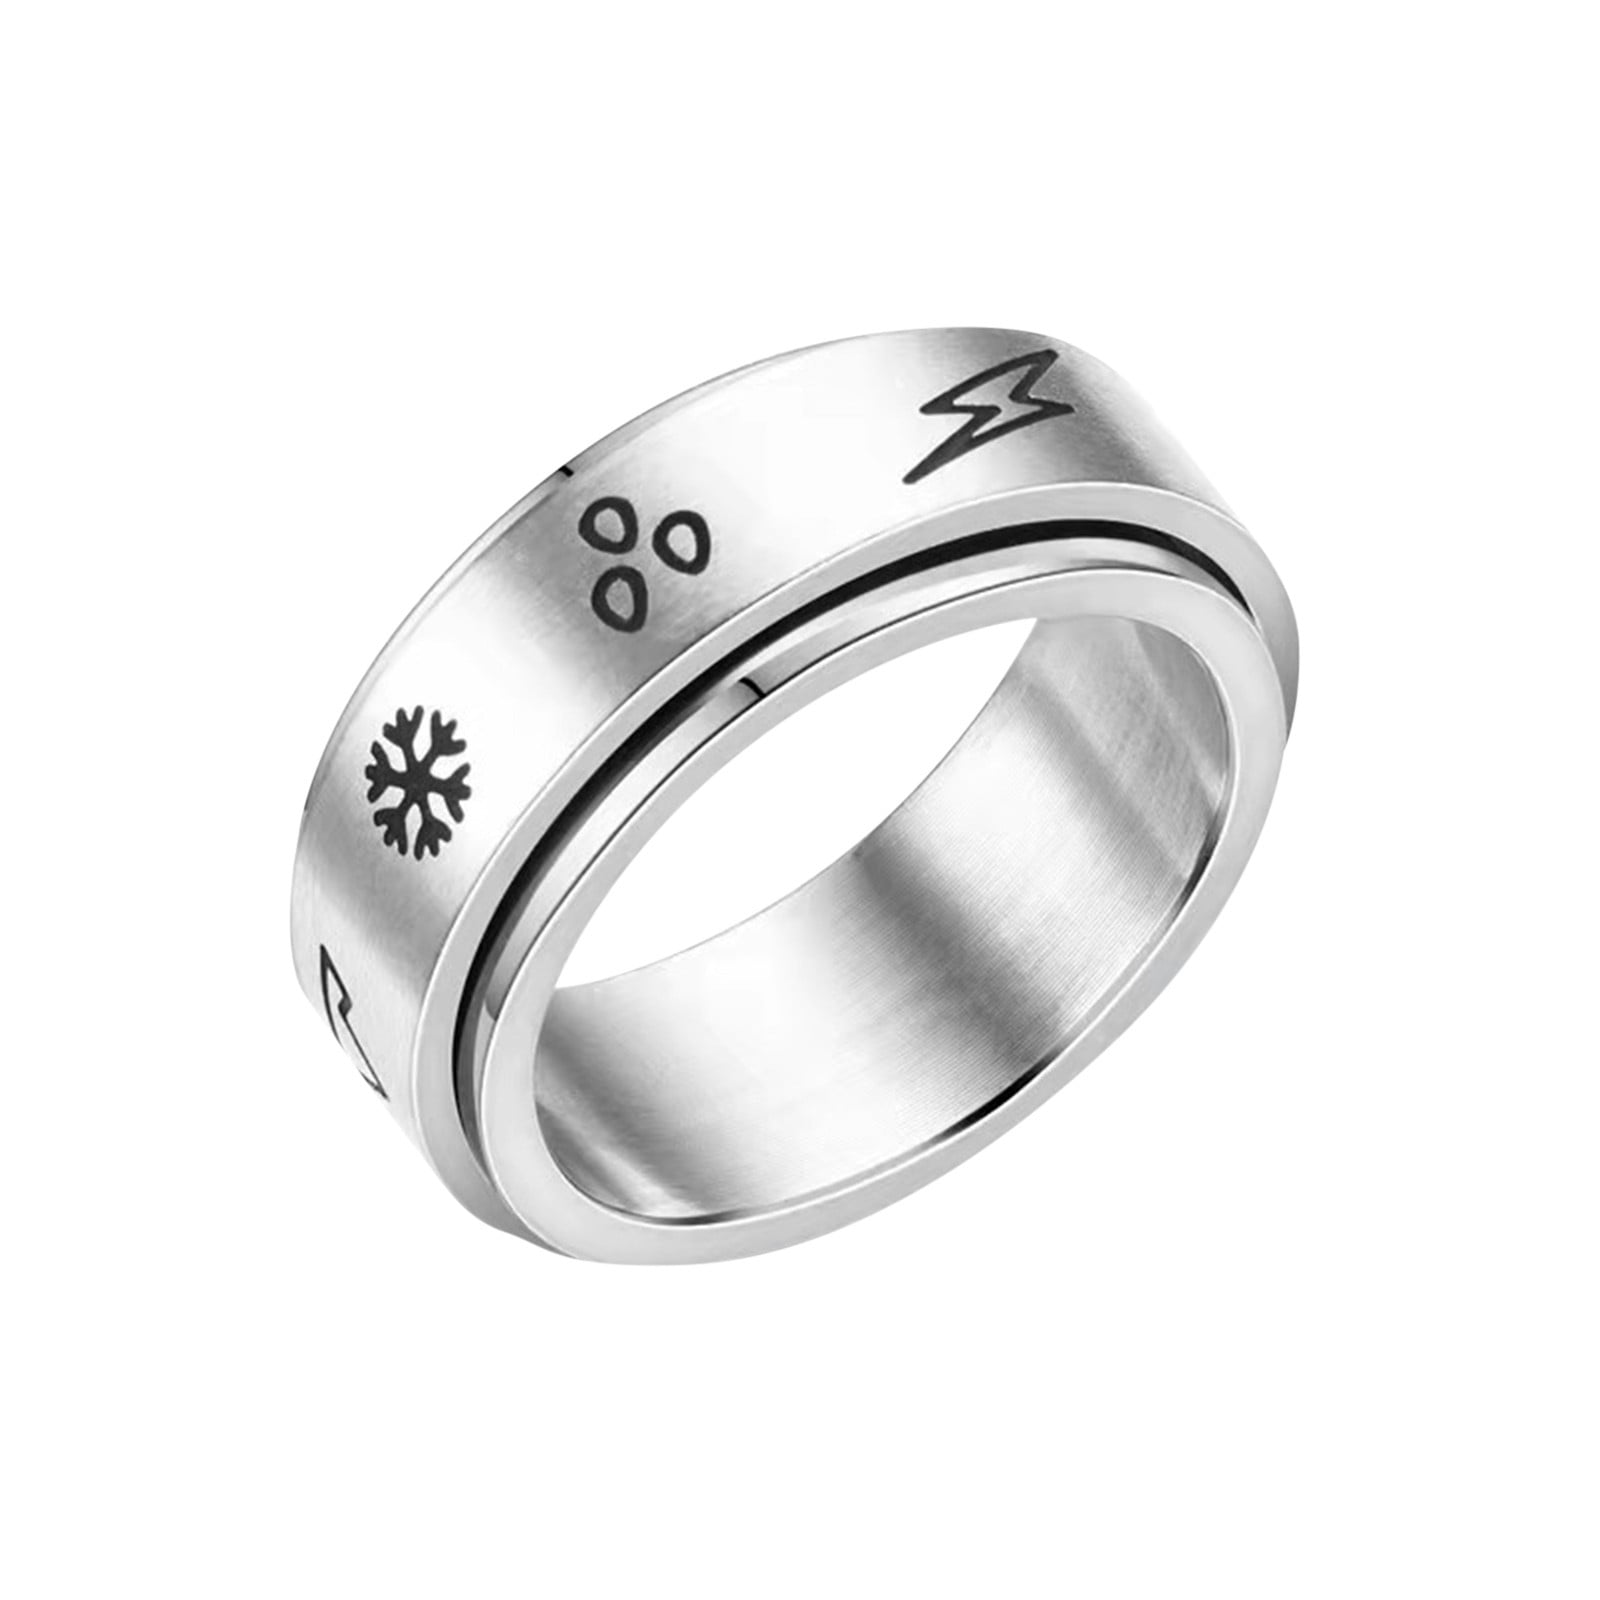 Stainless Steel Triple Moon Godness Ring Gold Finger Rings Unisex Jewelry Gifts